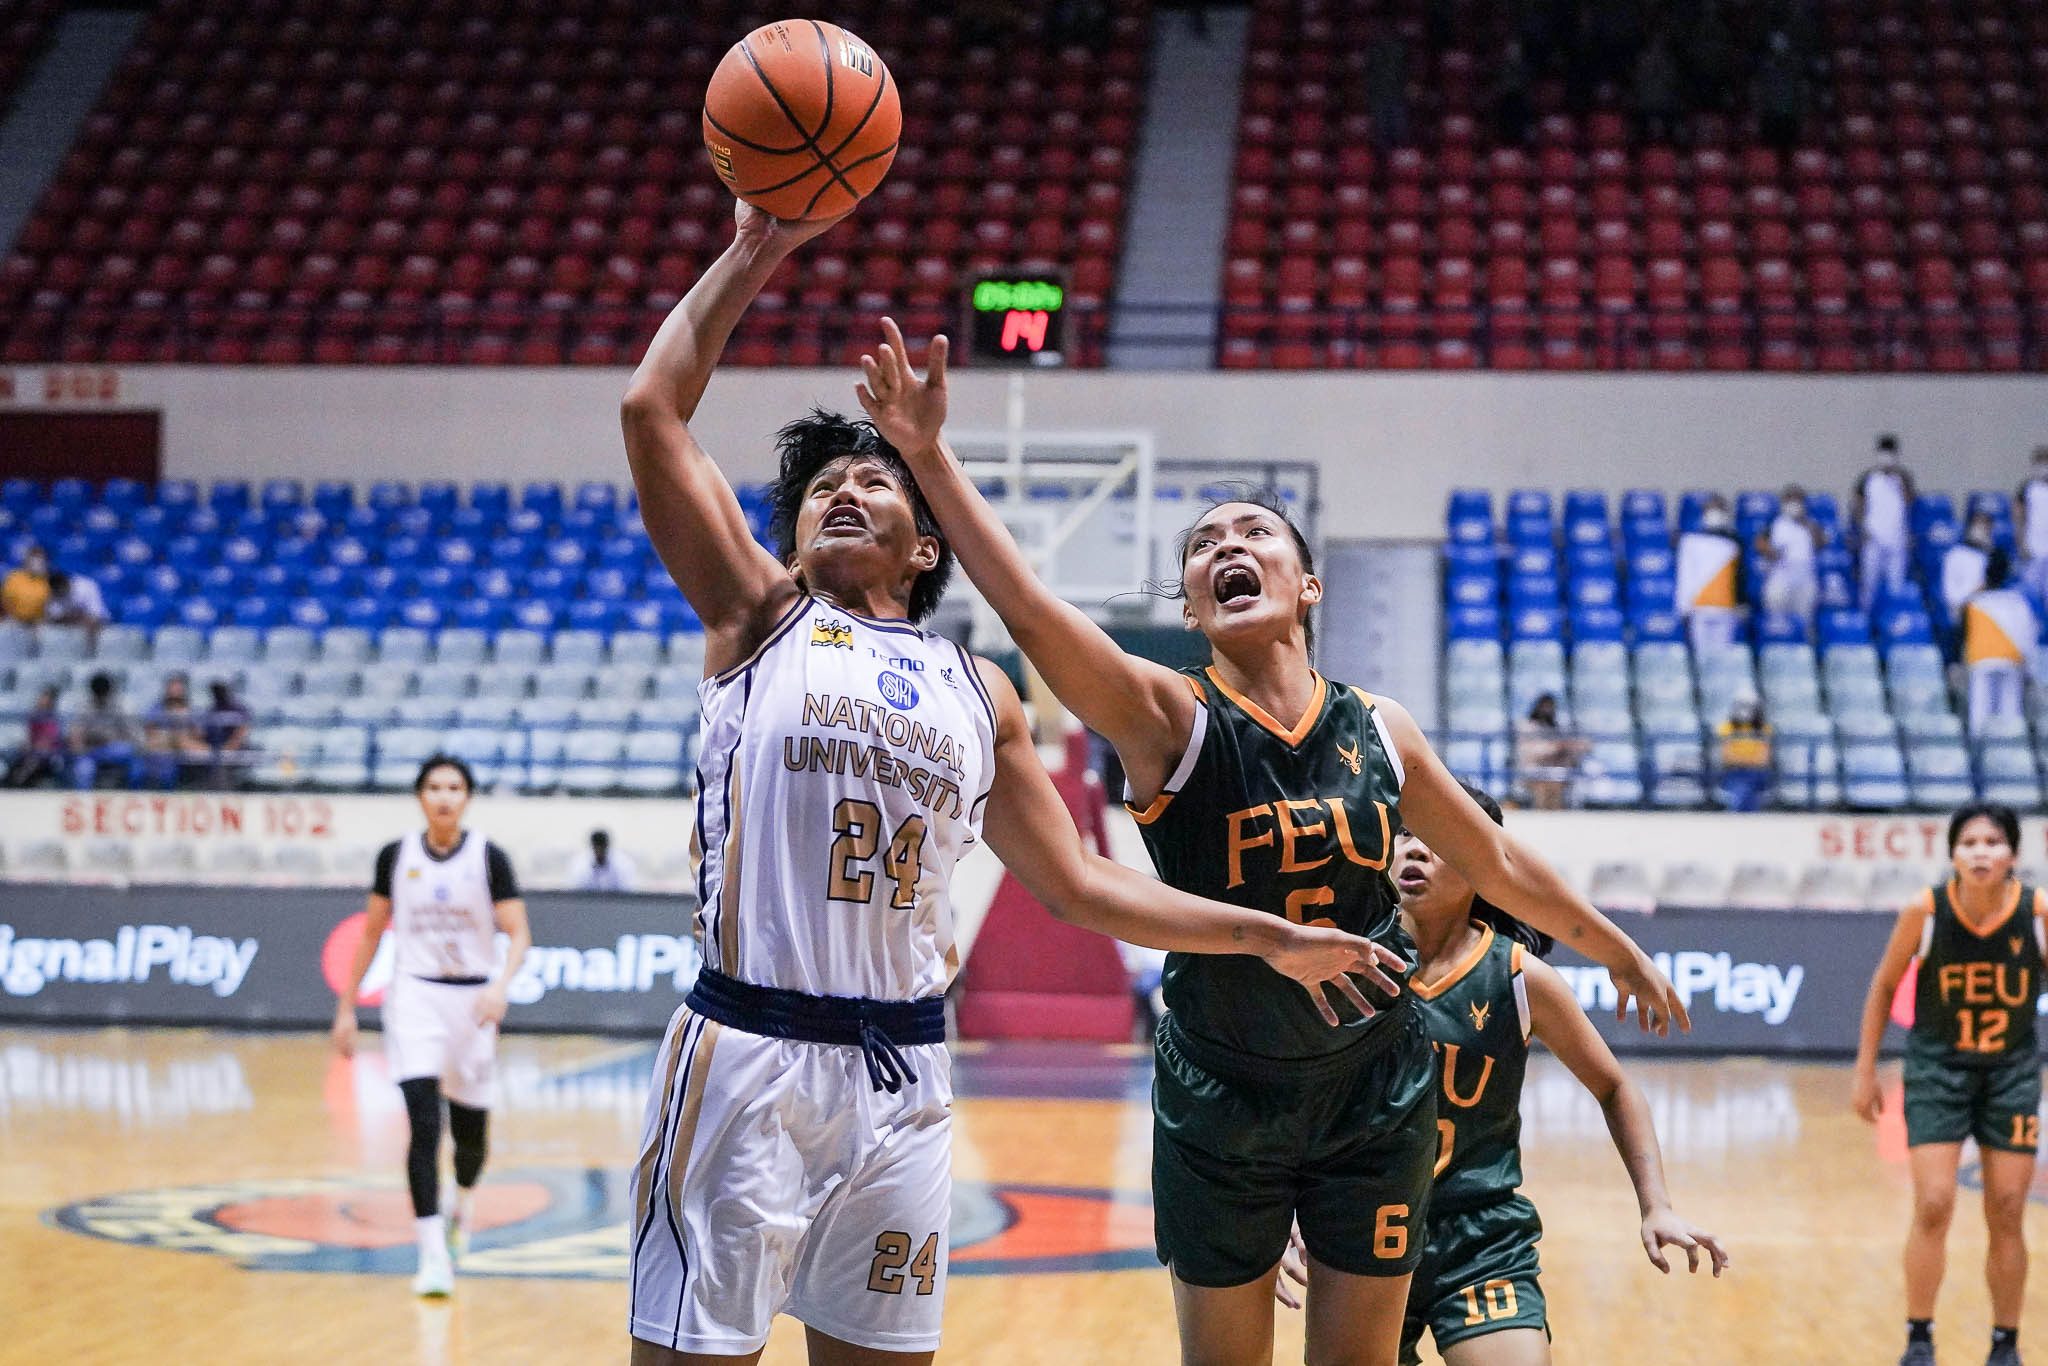 NU Lady Bulldogs complete perfect first-round run